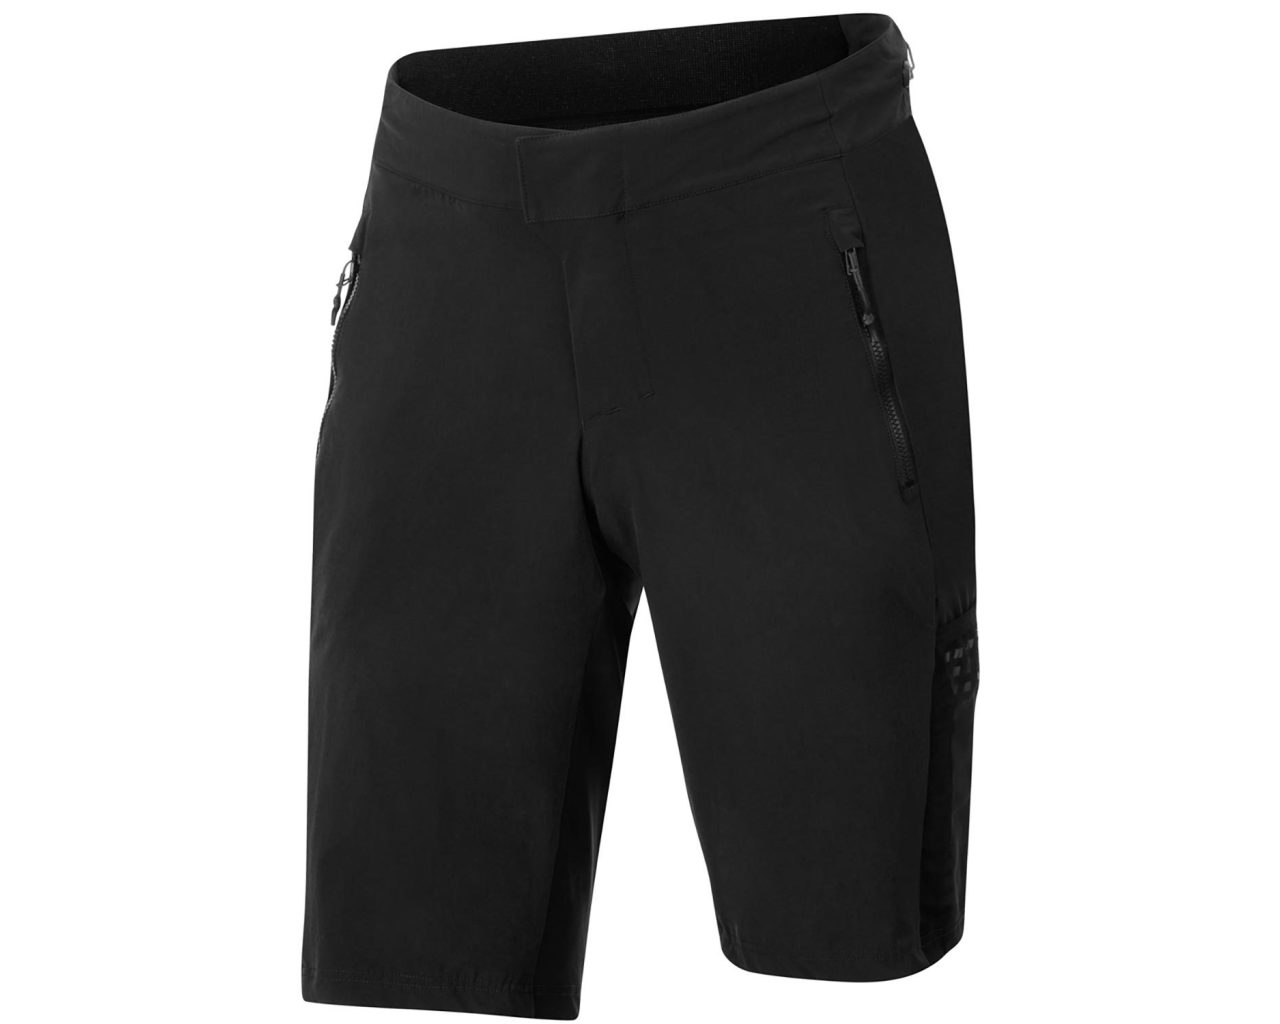 Sportful Supergiara Over Shorts | Merlin Cycles